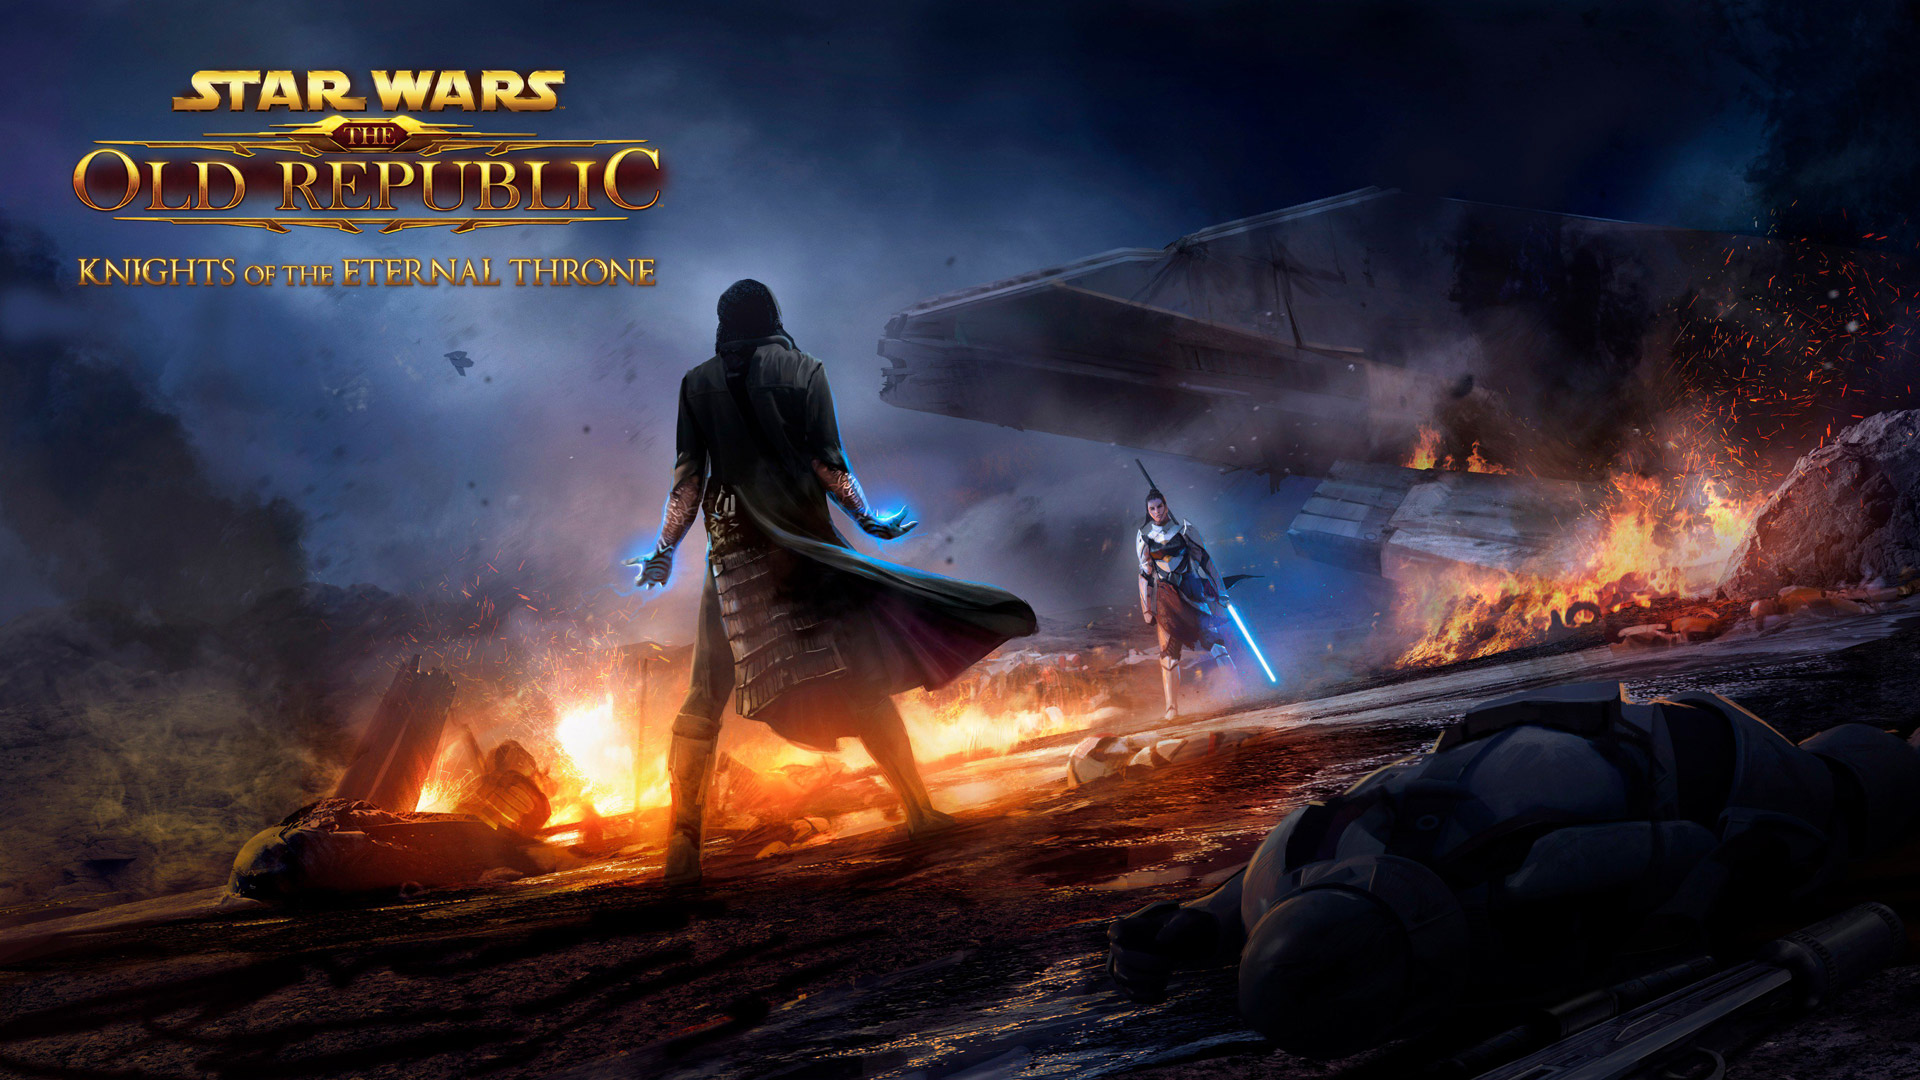 Star Wars: The Old Republic - Knights of the Eternal Throne - screenshot 1